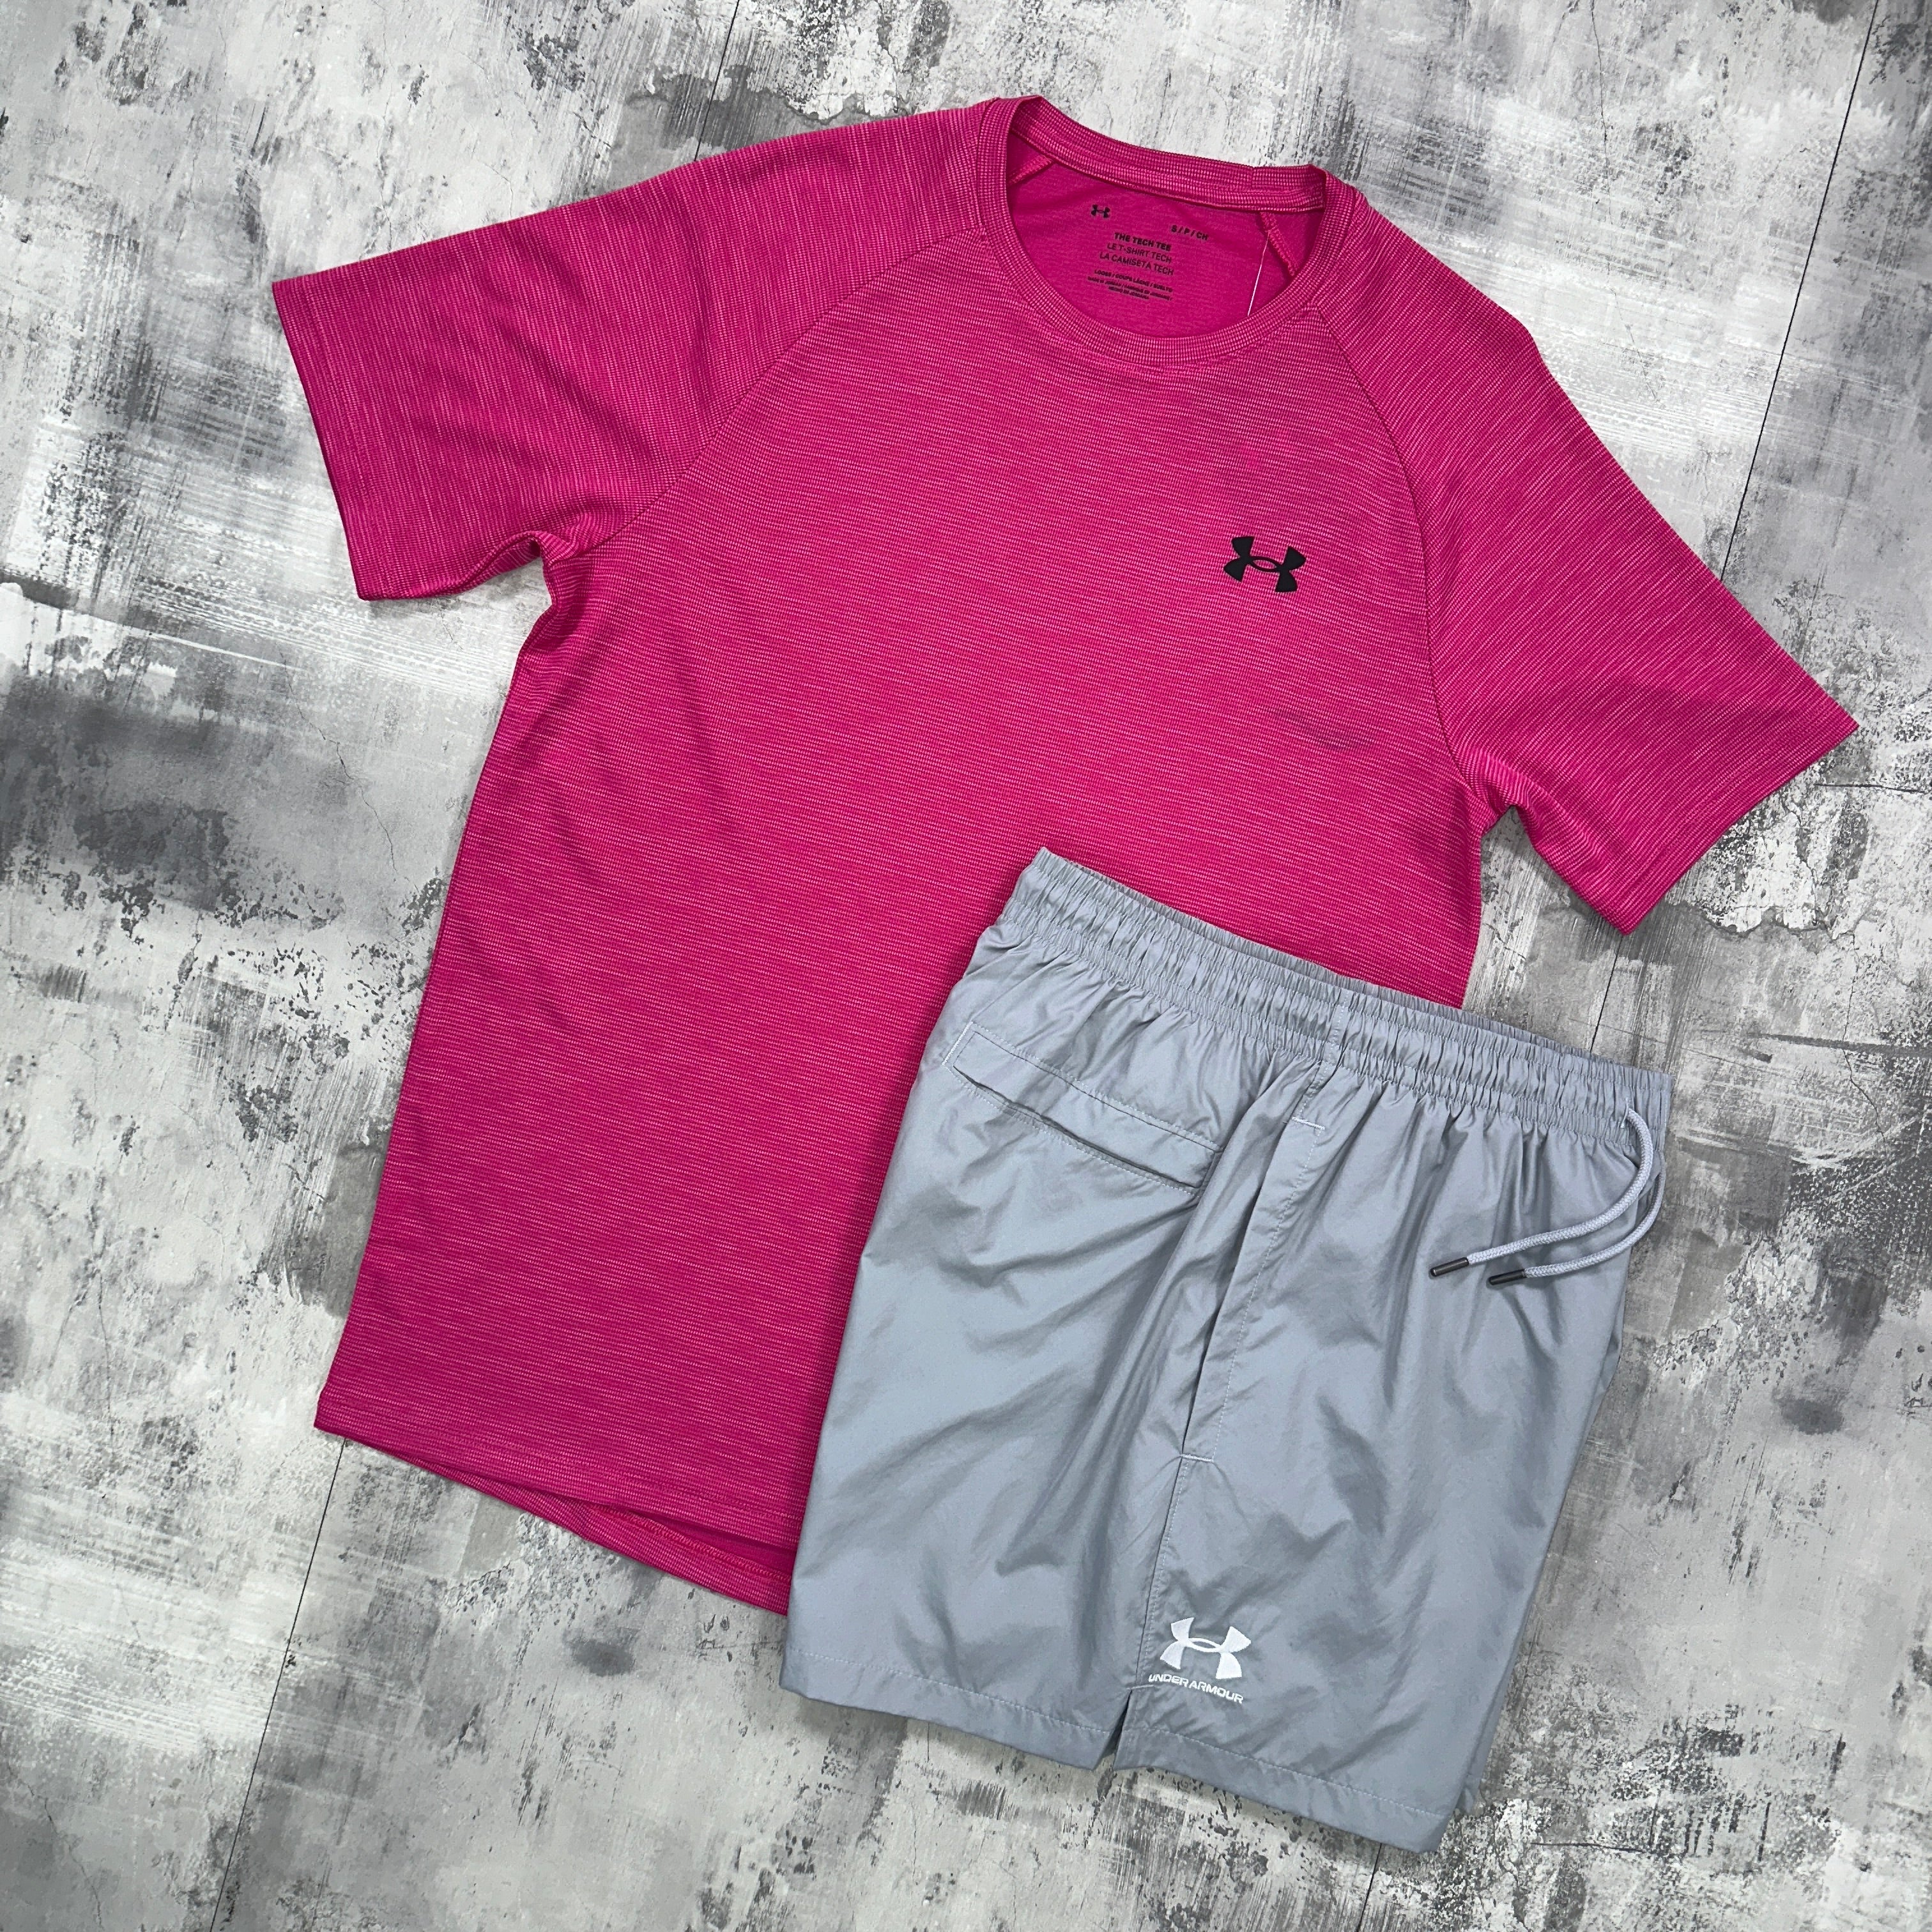 Under Armour Woven set Magenta - t-shirt and shorts